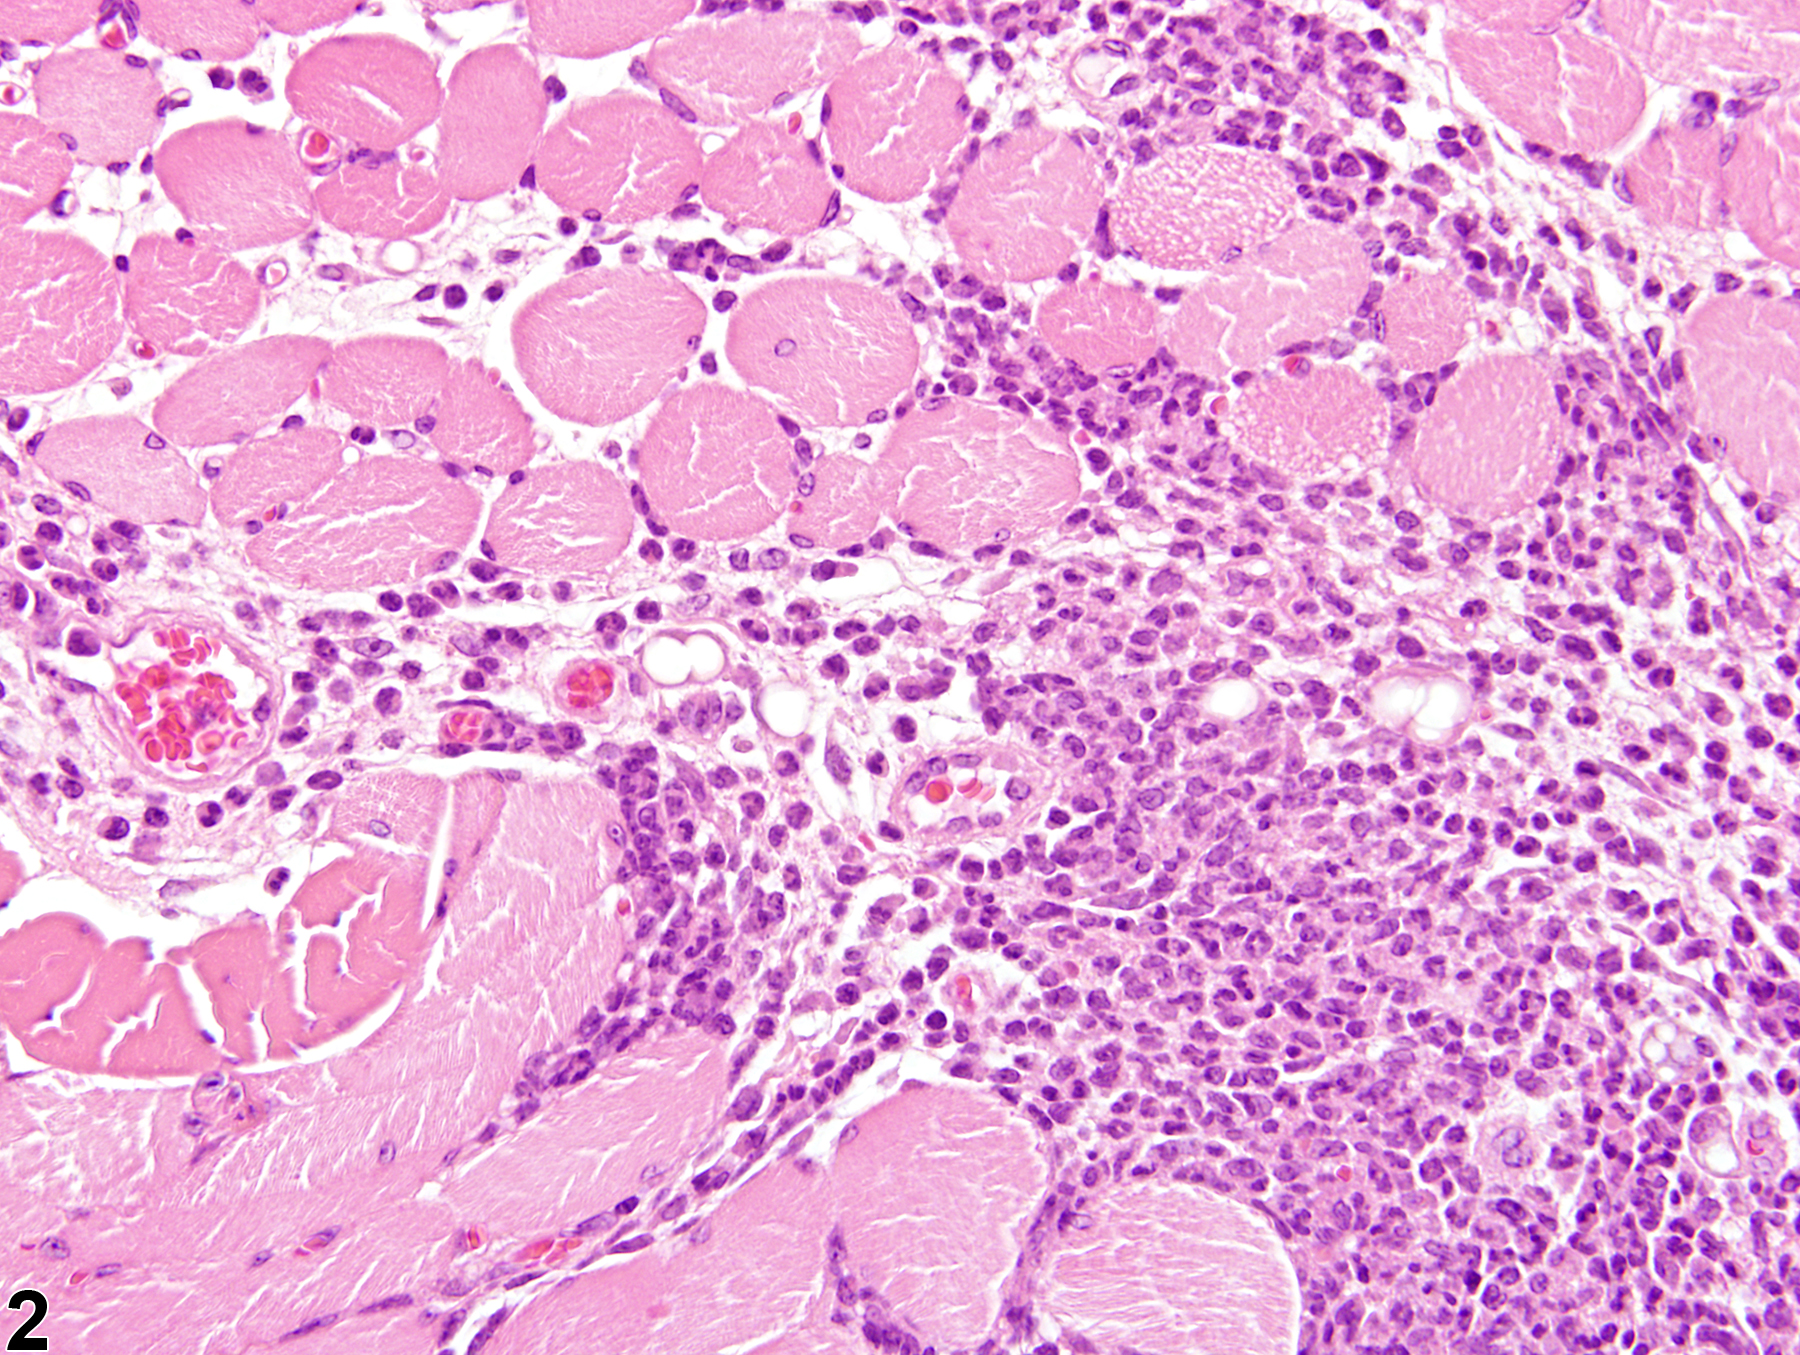 Image of inflammation in the skeletal muscle from a female Swiss CD-1 mouse in a chronic study